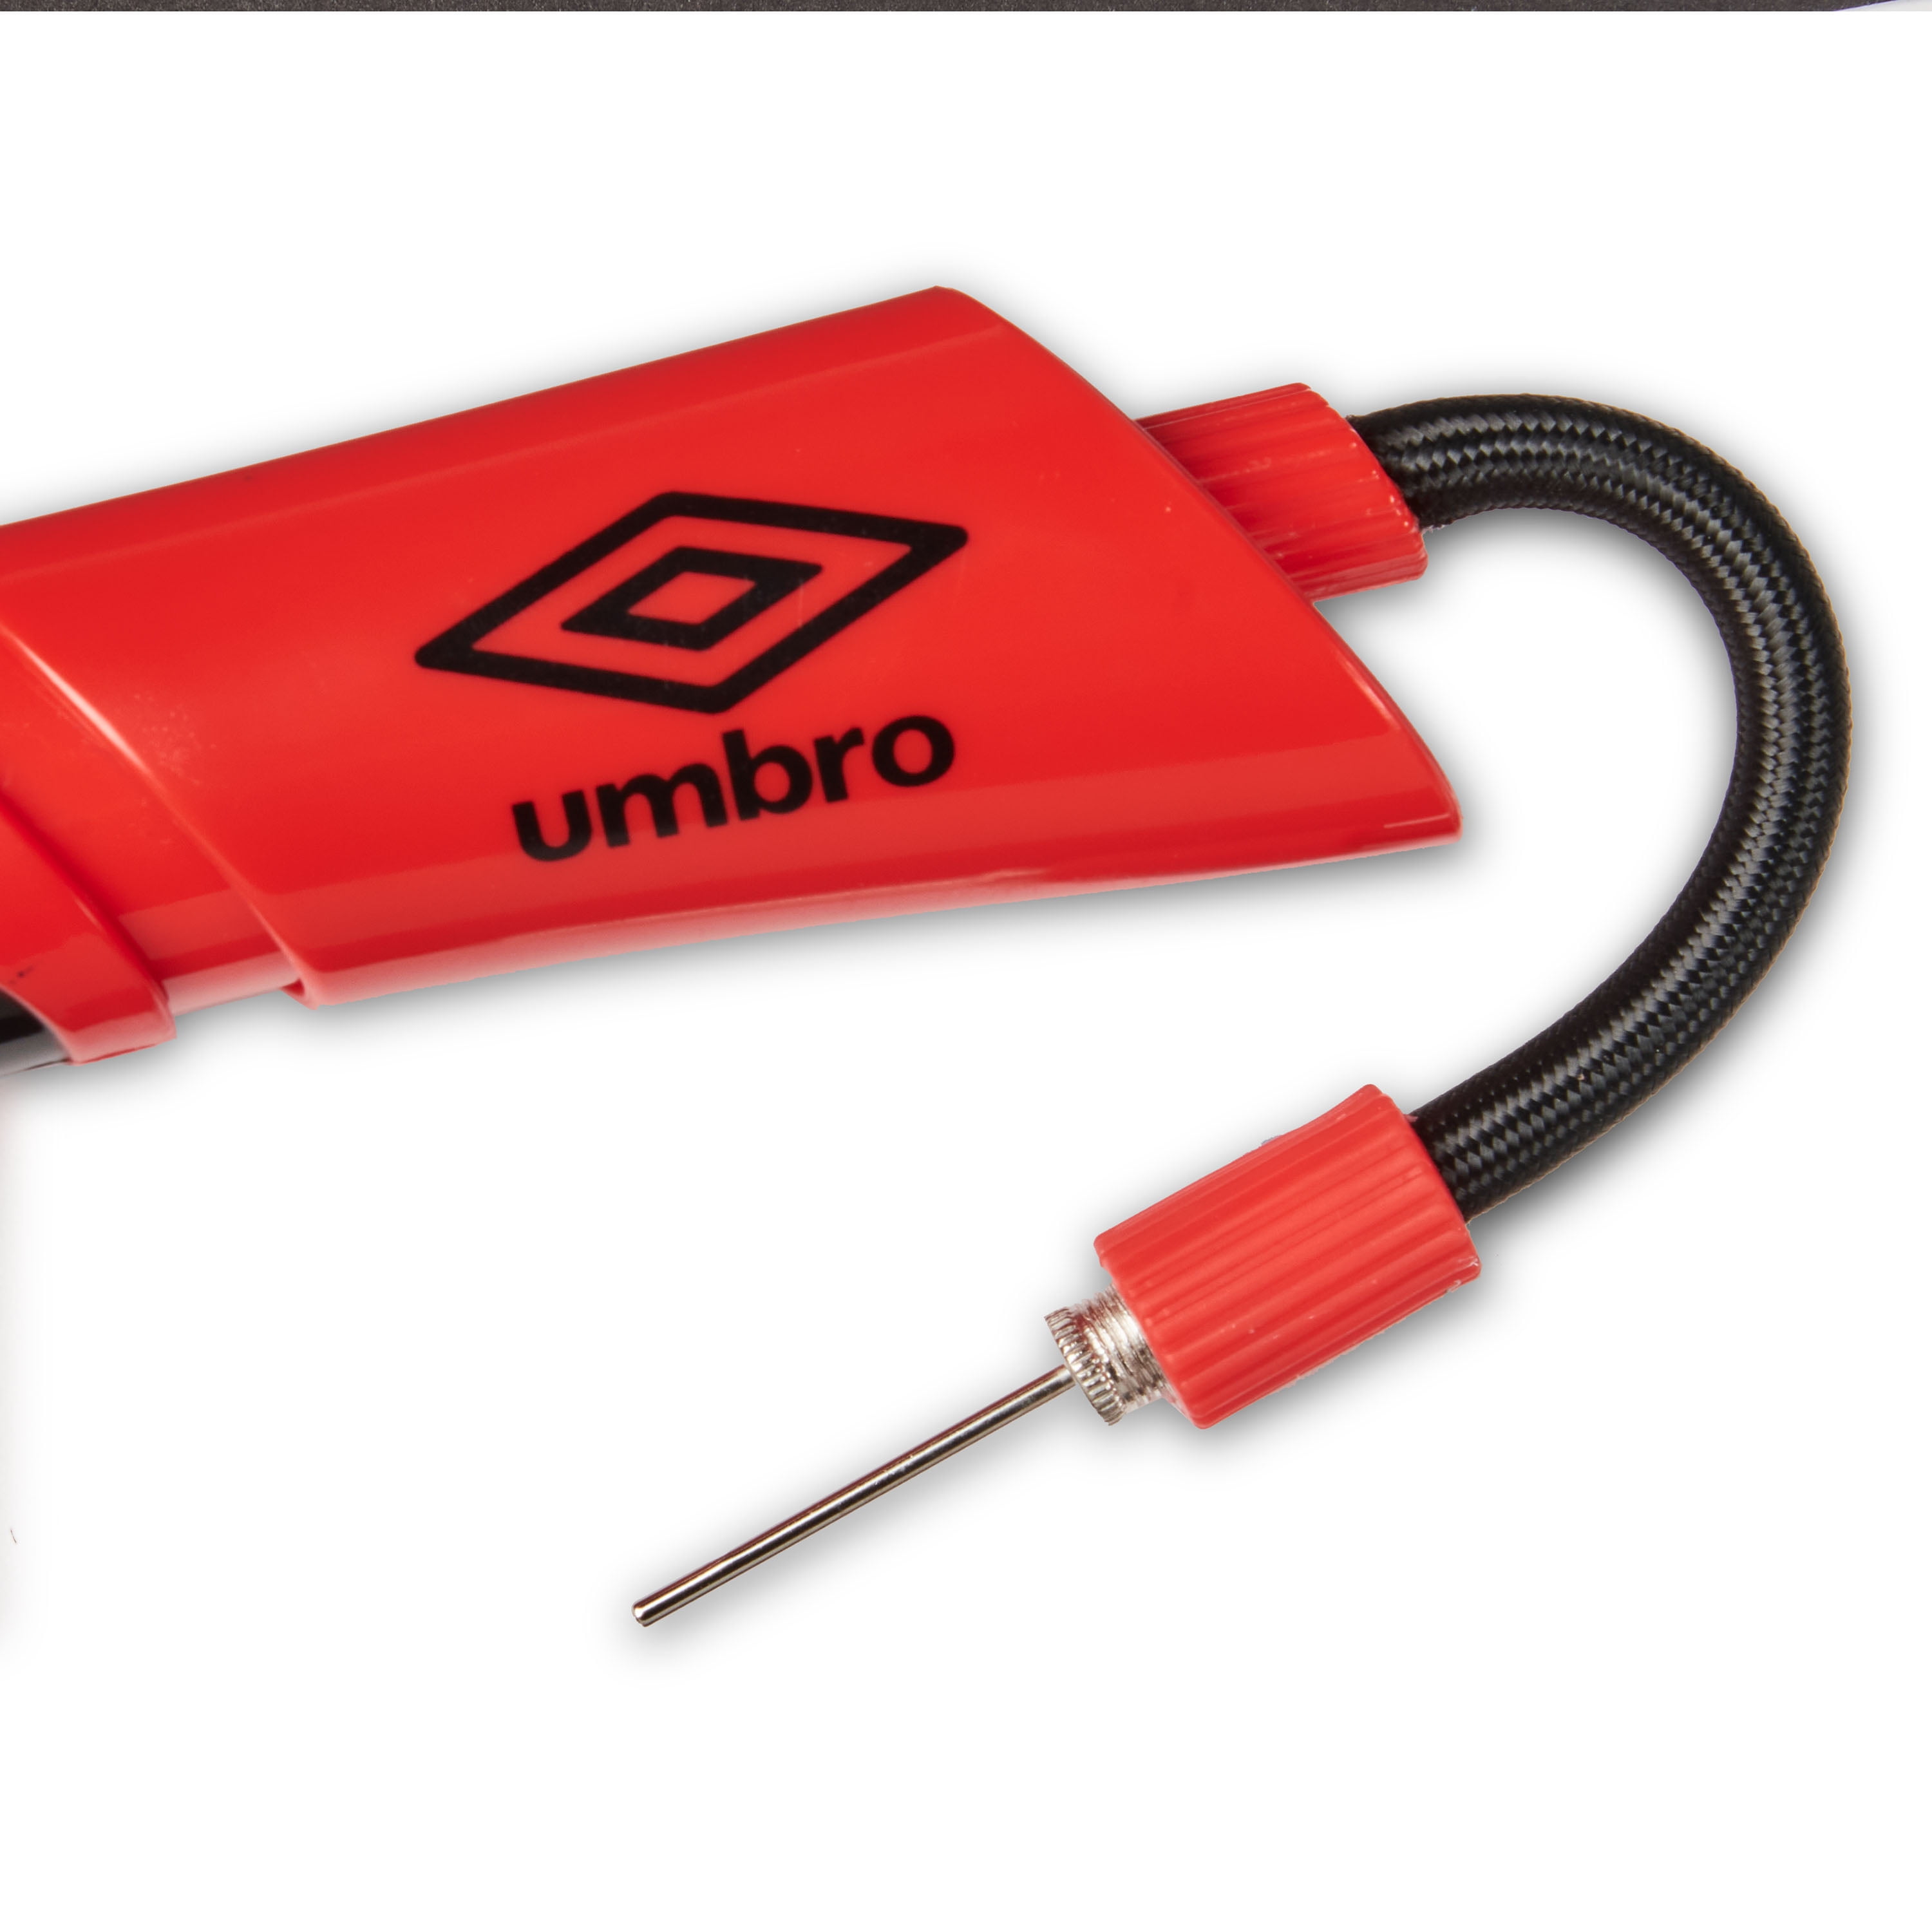 Umbro Multi Sports Ball Air Pump with Inflation Needle, Manual, Yellow, 0.5  lb